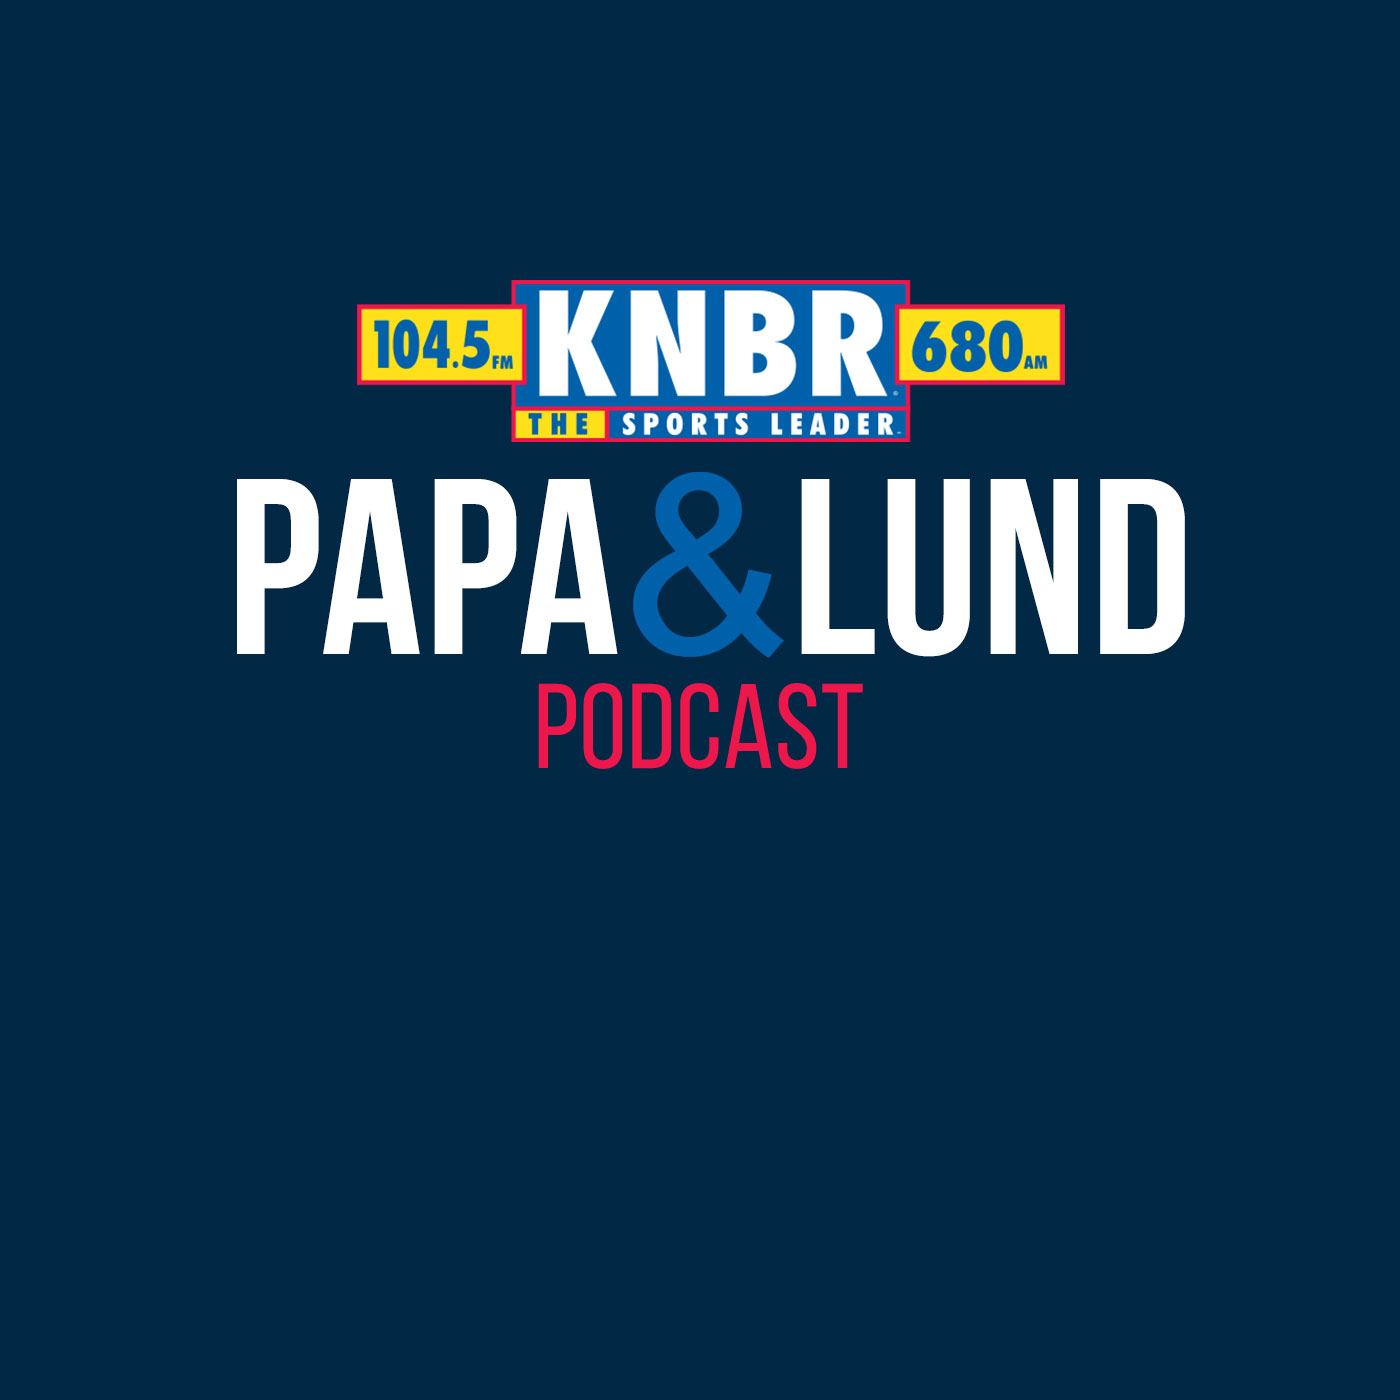 11-29 Logan Murdock joins Papa & Lund to discuss if the Warriors issues can be resolved in order to see them back to playing championship basketball